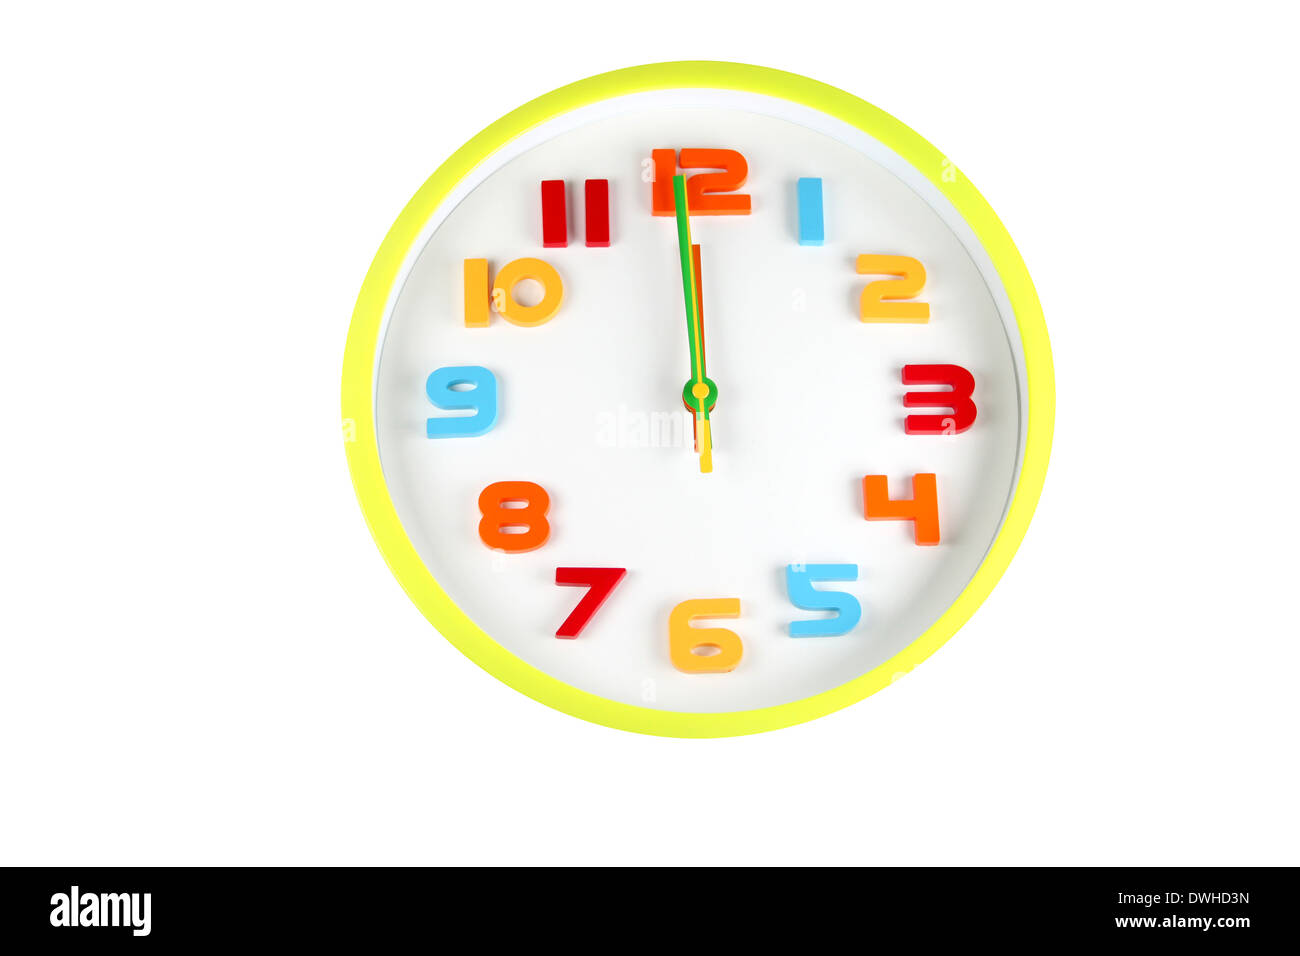 Colorful clock in telling time of Twelve o'clock on white background. Stock Photo